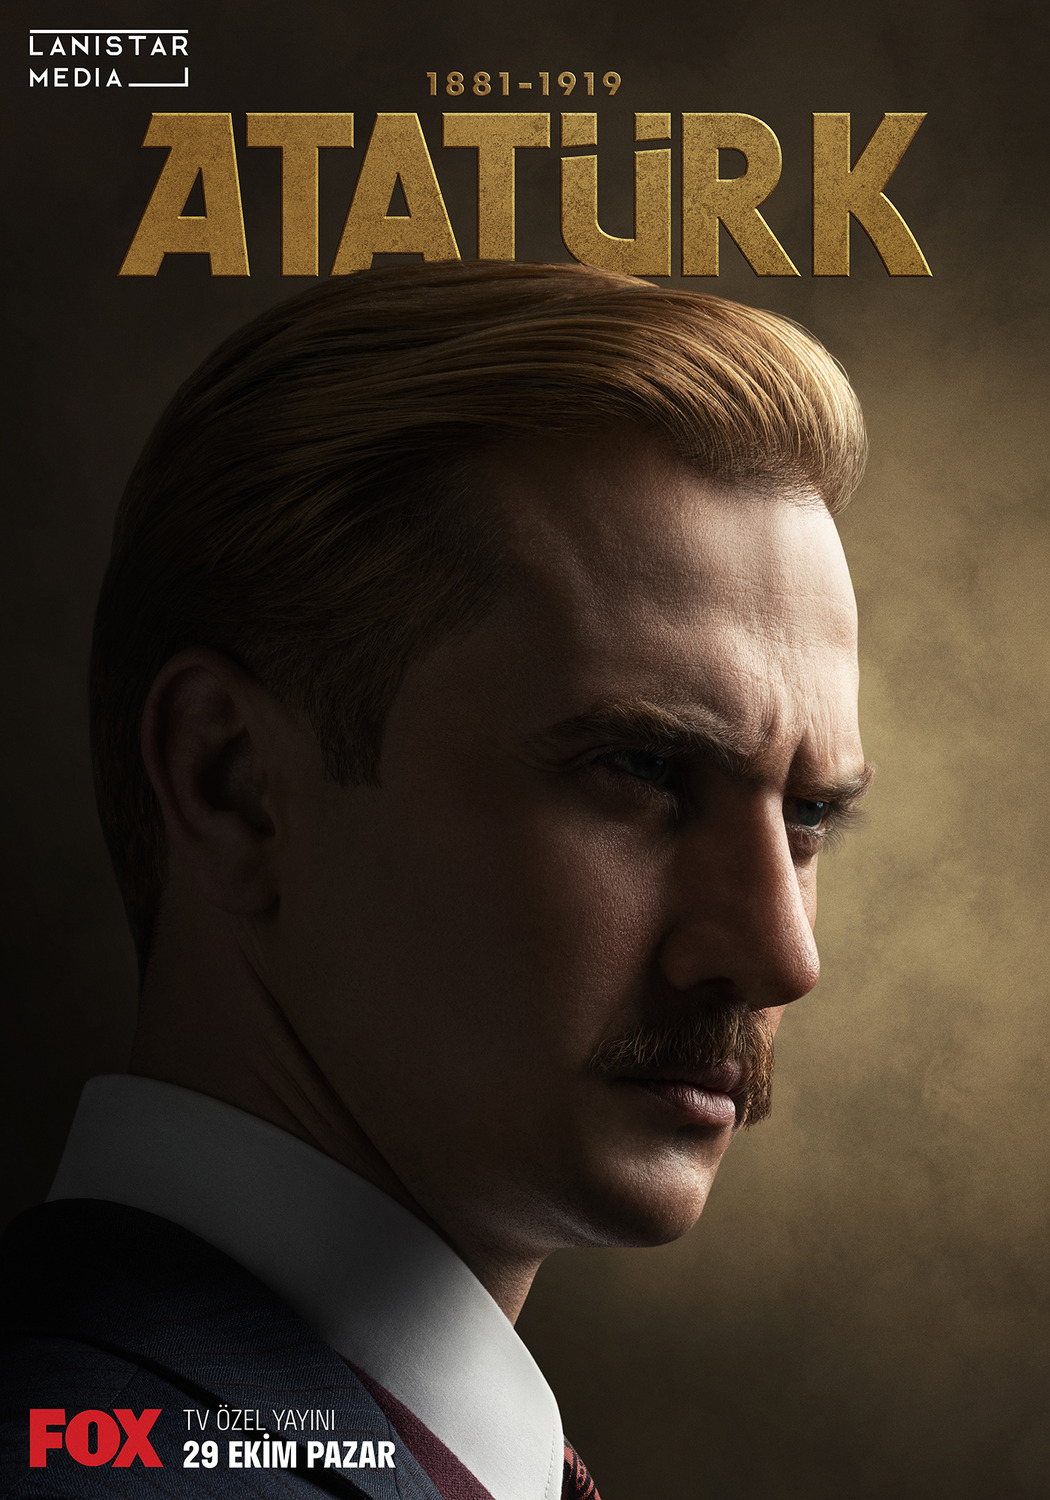 Extra Large TV Poster Image for Atatürk 1881 - 1919 (#3 of 11)